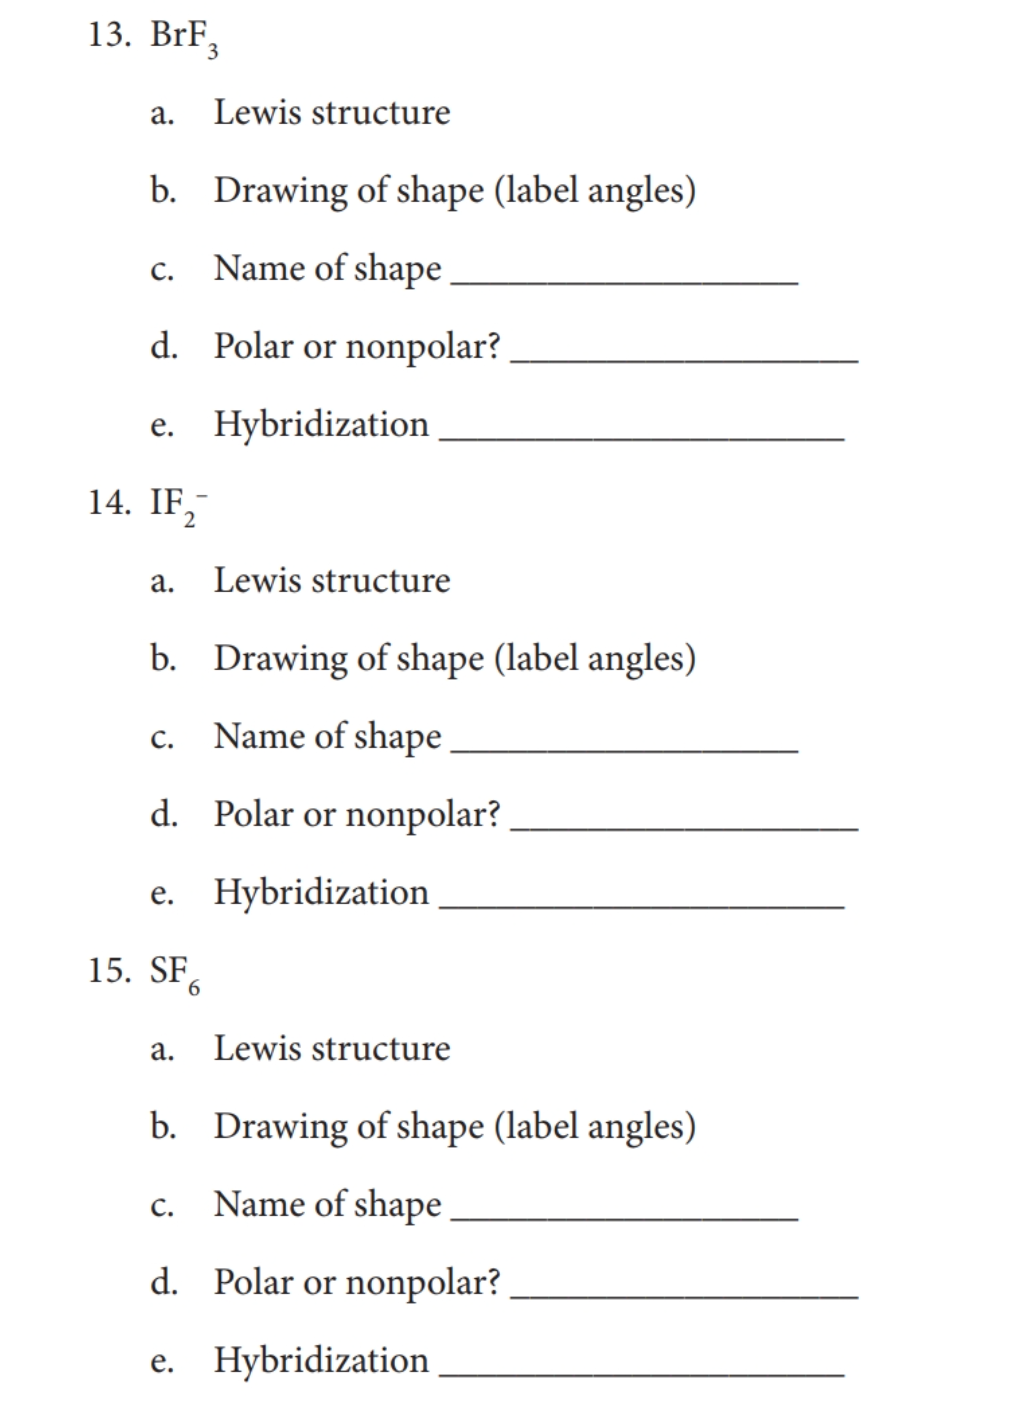 13. BrF,
а.
Lewis structure
b. Drawing of shape (label angles)
Name of shape
С.
d. Polar or nonpolar?
e. Hybridization
14. IF,
2
а.
Lewis structure
b. Drawing of shape (label angles)
С.
Name of shape
d. Polar or nonpolar?
e. Hybridization
е.
15. SF.
6.
а.
Lewis structure
b. Drawing of shape (label angles)
Name of shape
С.
d. Polar or nonpolar?
e. Hybridization
